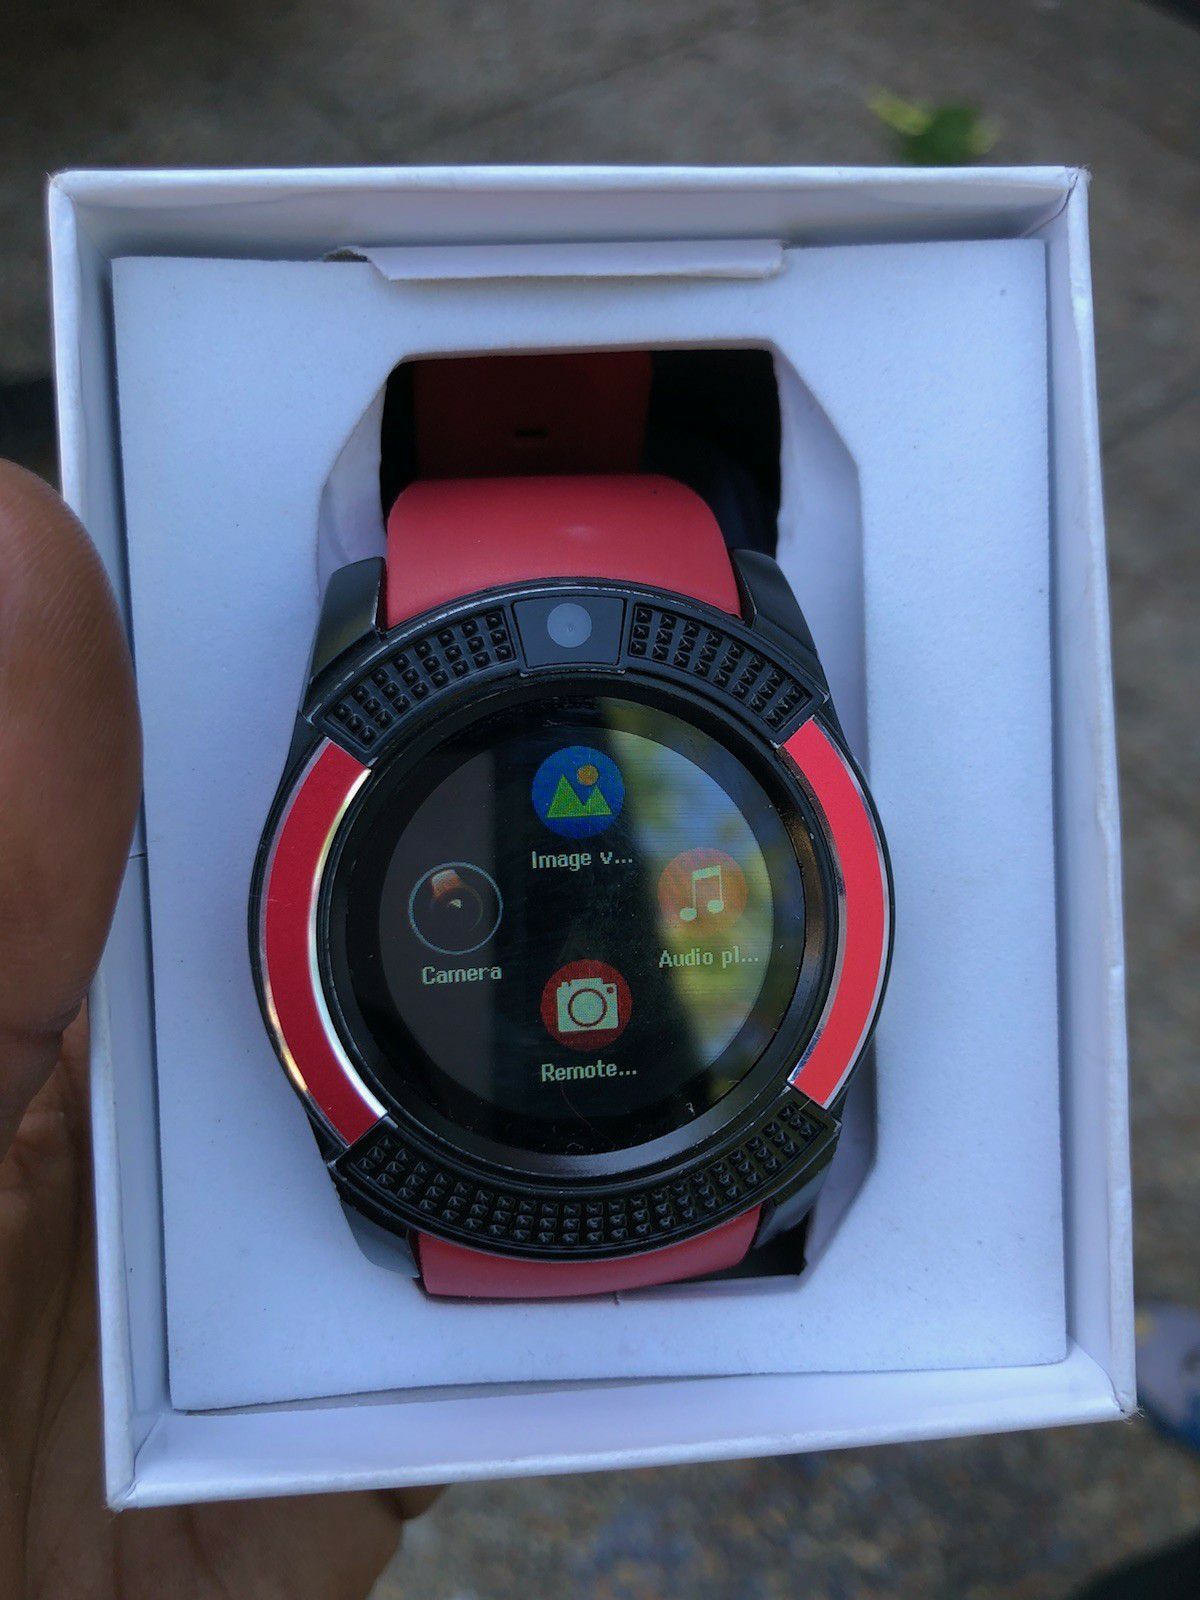 Android smart watch